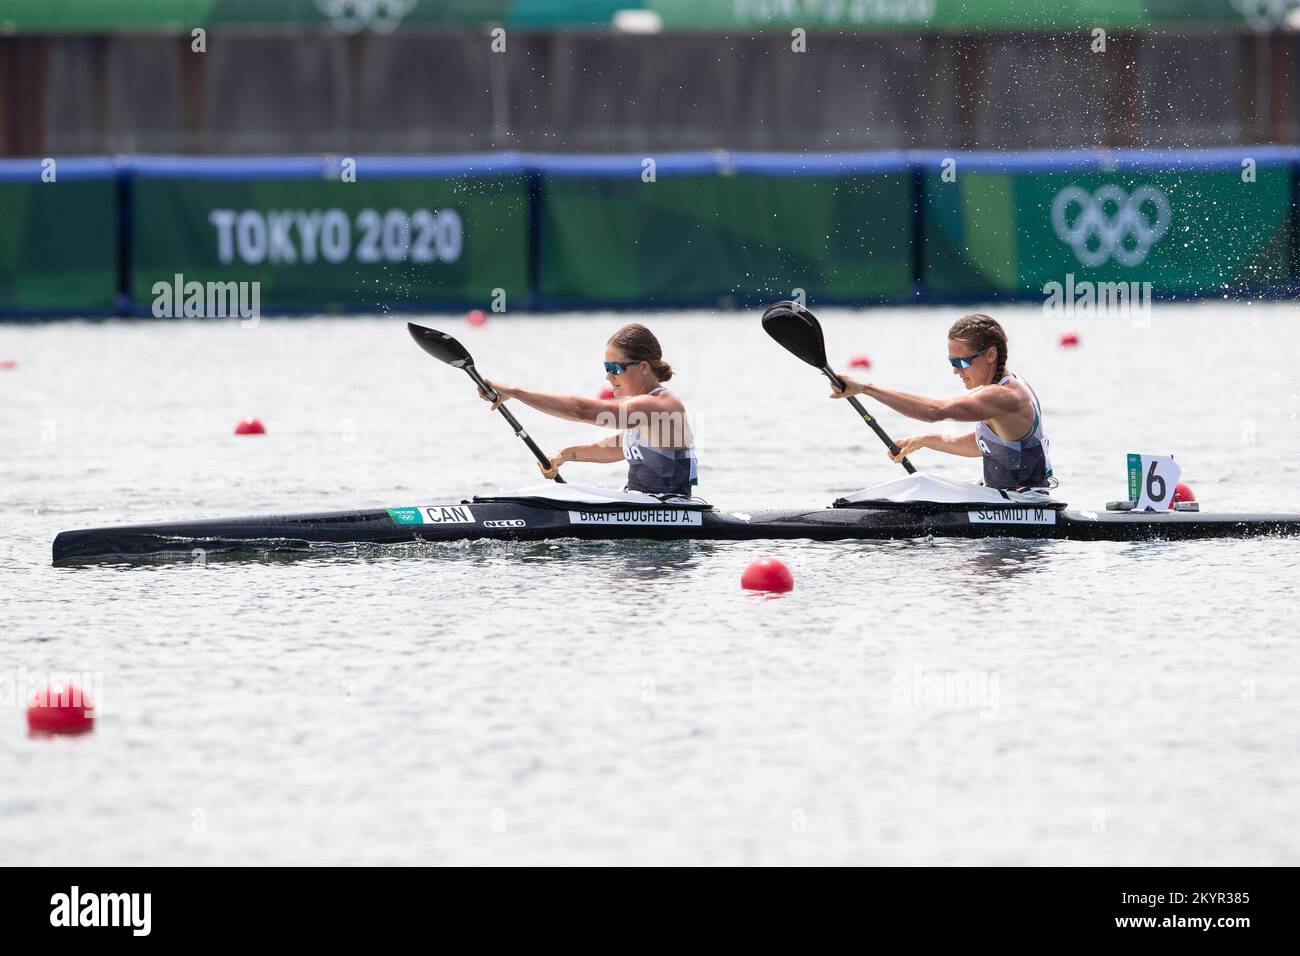 August 02, 2021: Alanna Bray-Lougheed and Madeline Schmidt of Team Canada race during the WomenÕs Kayak Double 500m Canoe Sprint Heats, Tokyo 2020 Olympic Games at Sea Forest Waterway in Tokyo, Japan. Daniel Lea/CSM} Stock Photo